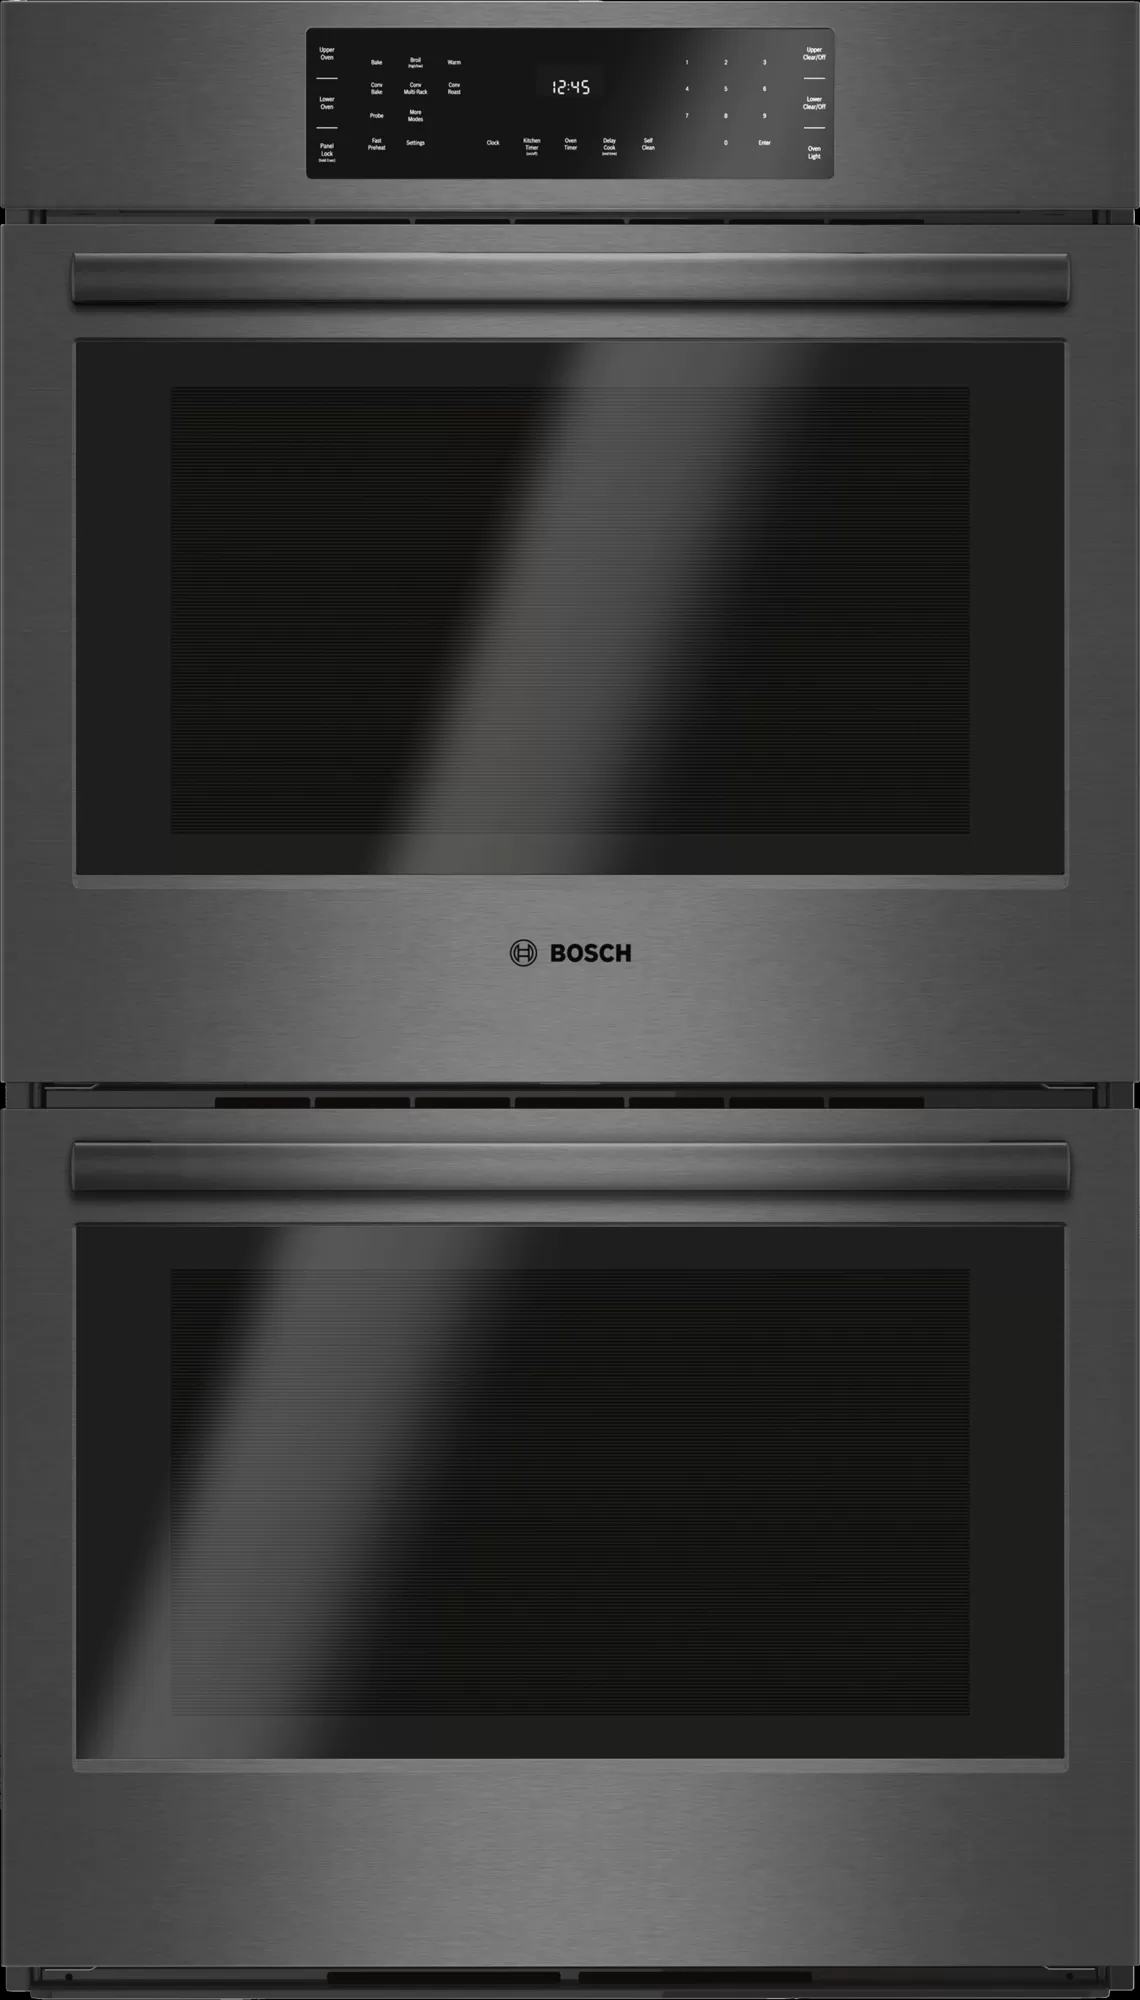 Bosch 800 Series 30" Black Stainless Steel Built In Electric Double Oven-HBL8642UC